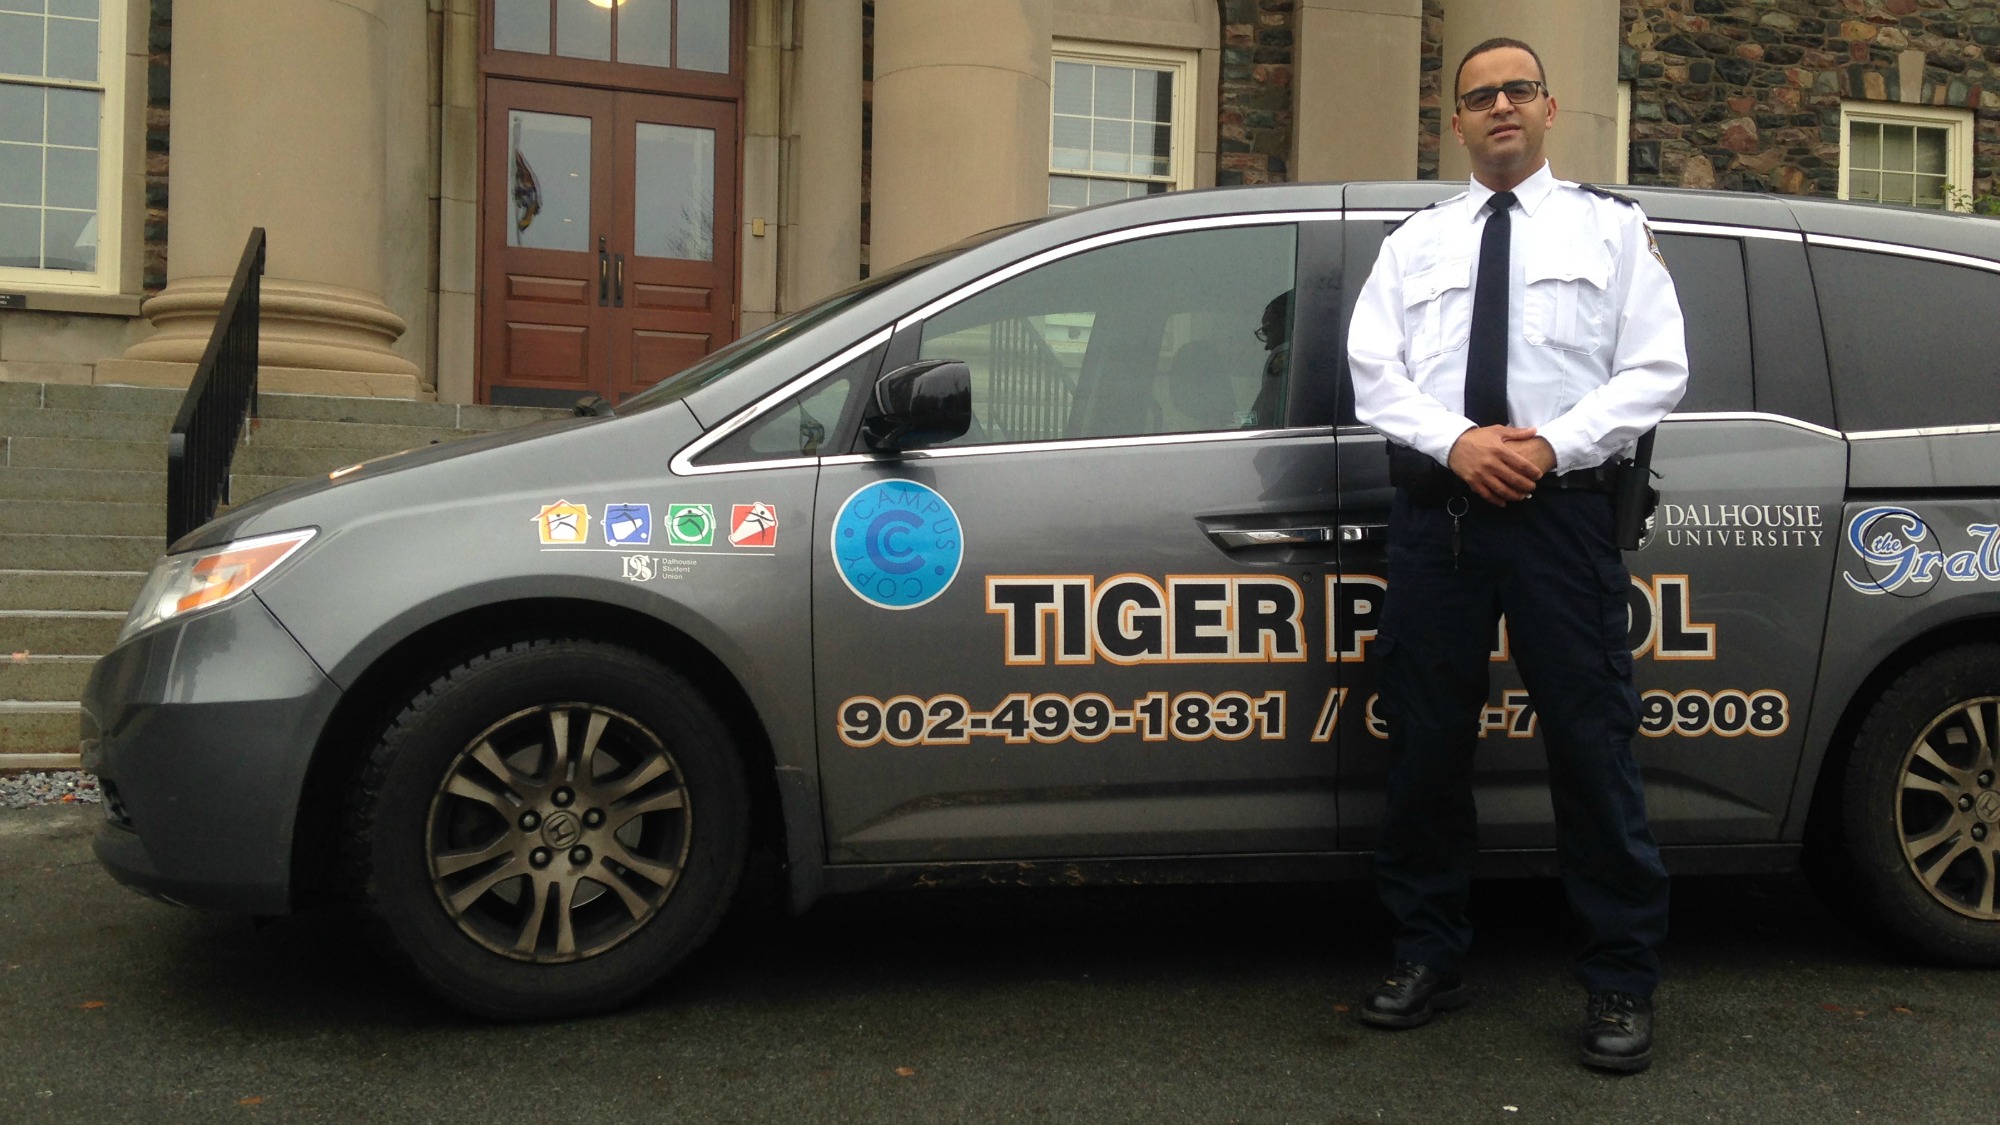 Tiger Patrol is made up of only two vans. Jake MacIsaac of Security Services hopes a few more vehicles will be added to the fleet in coming years